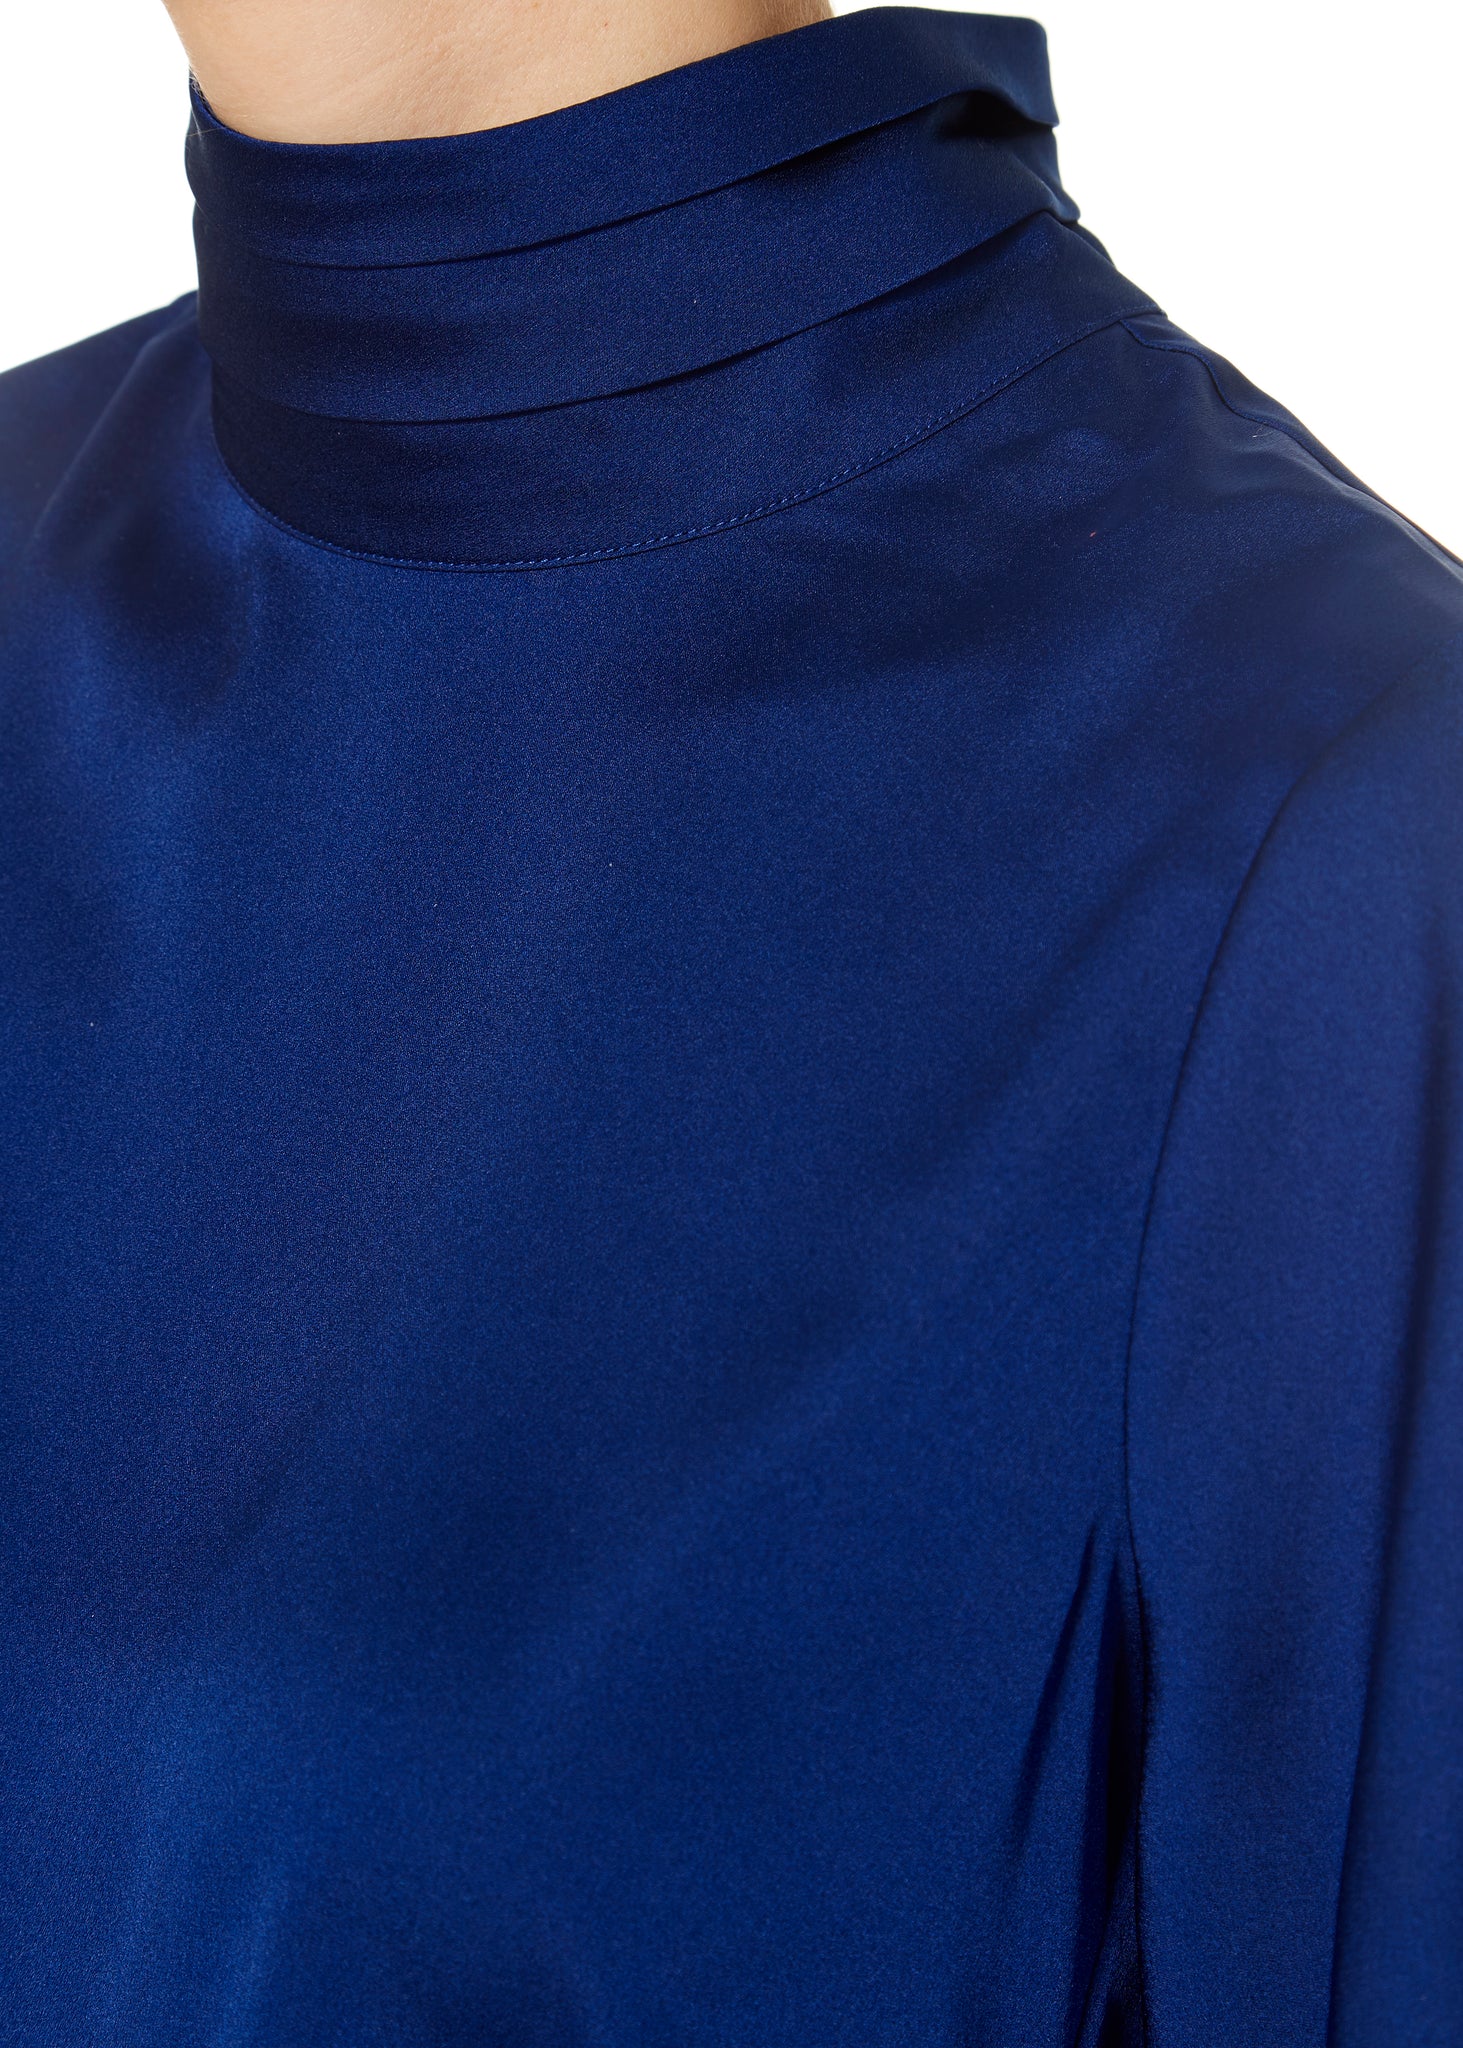 'Meet Up' Blue High Neck Top With Sleeves - Jessimara